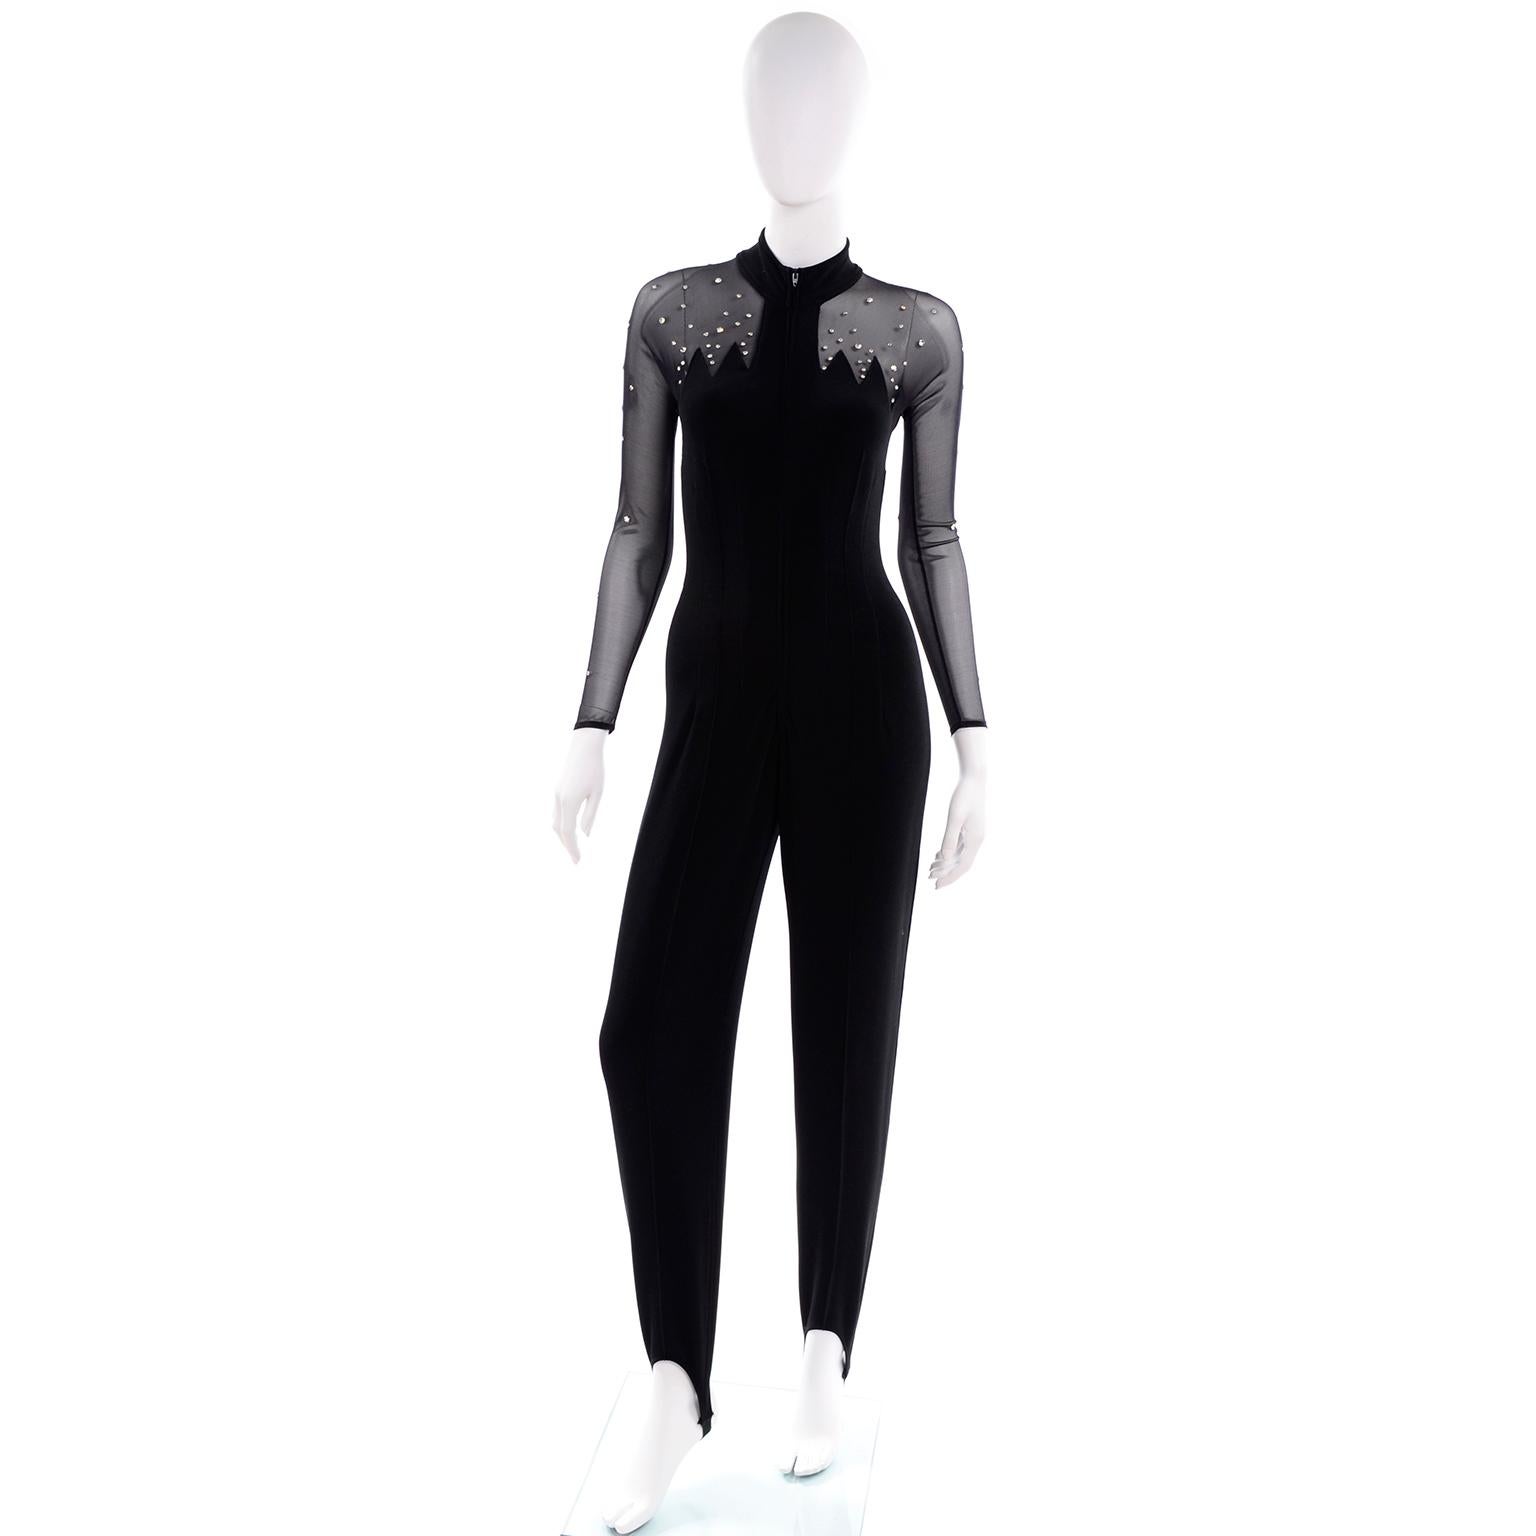 This stunning black stretch knit jumpsuit from Tadashi has sheer mesh on the sleeves and bodice and large panels on the back. This jumpsuit would make a great evening dress alternative! The front has zig zag detail at the shoulders and chest area